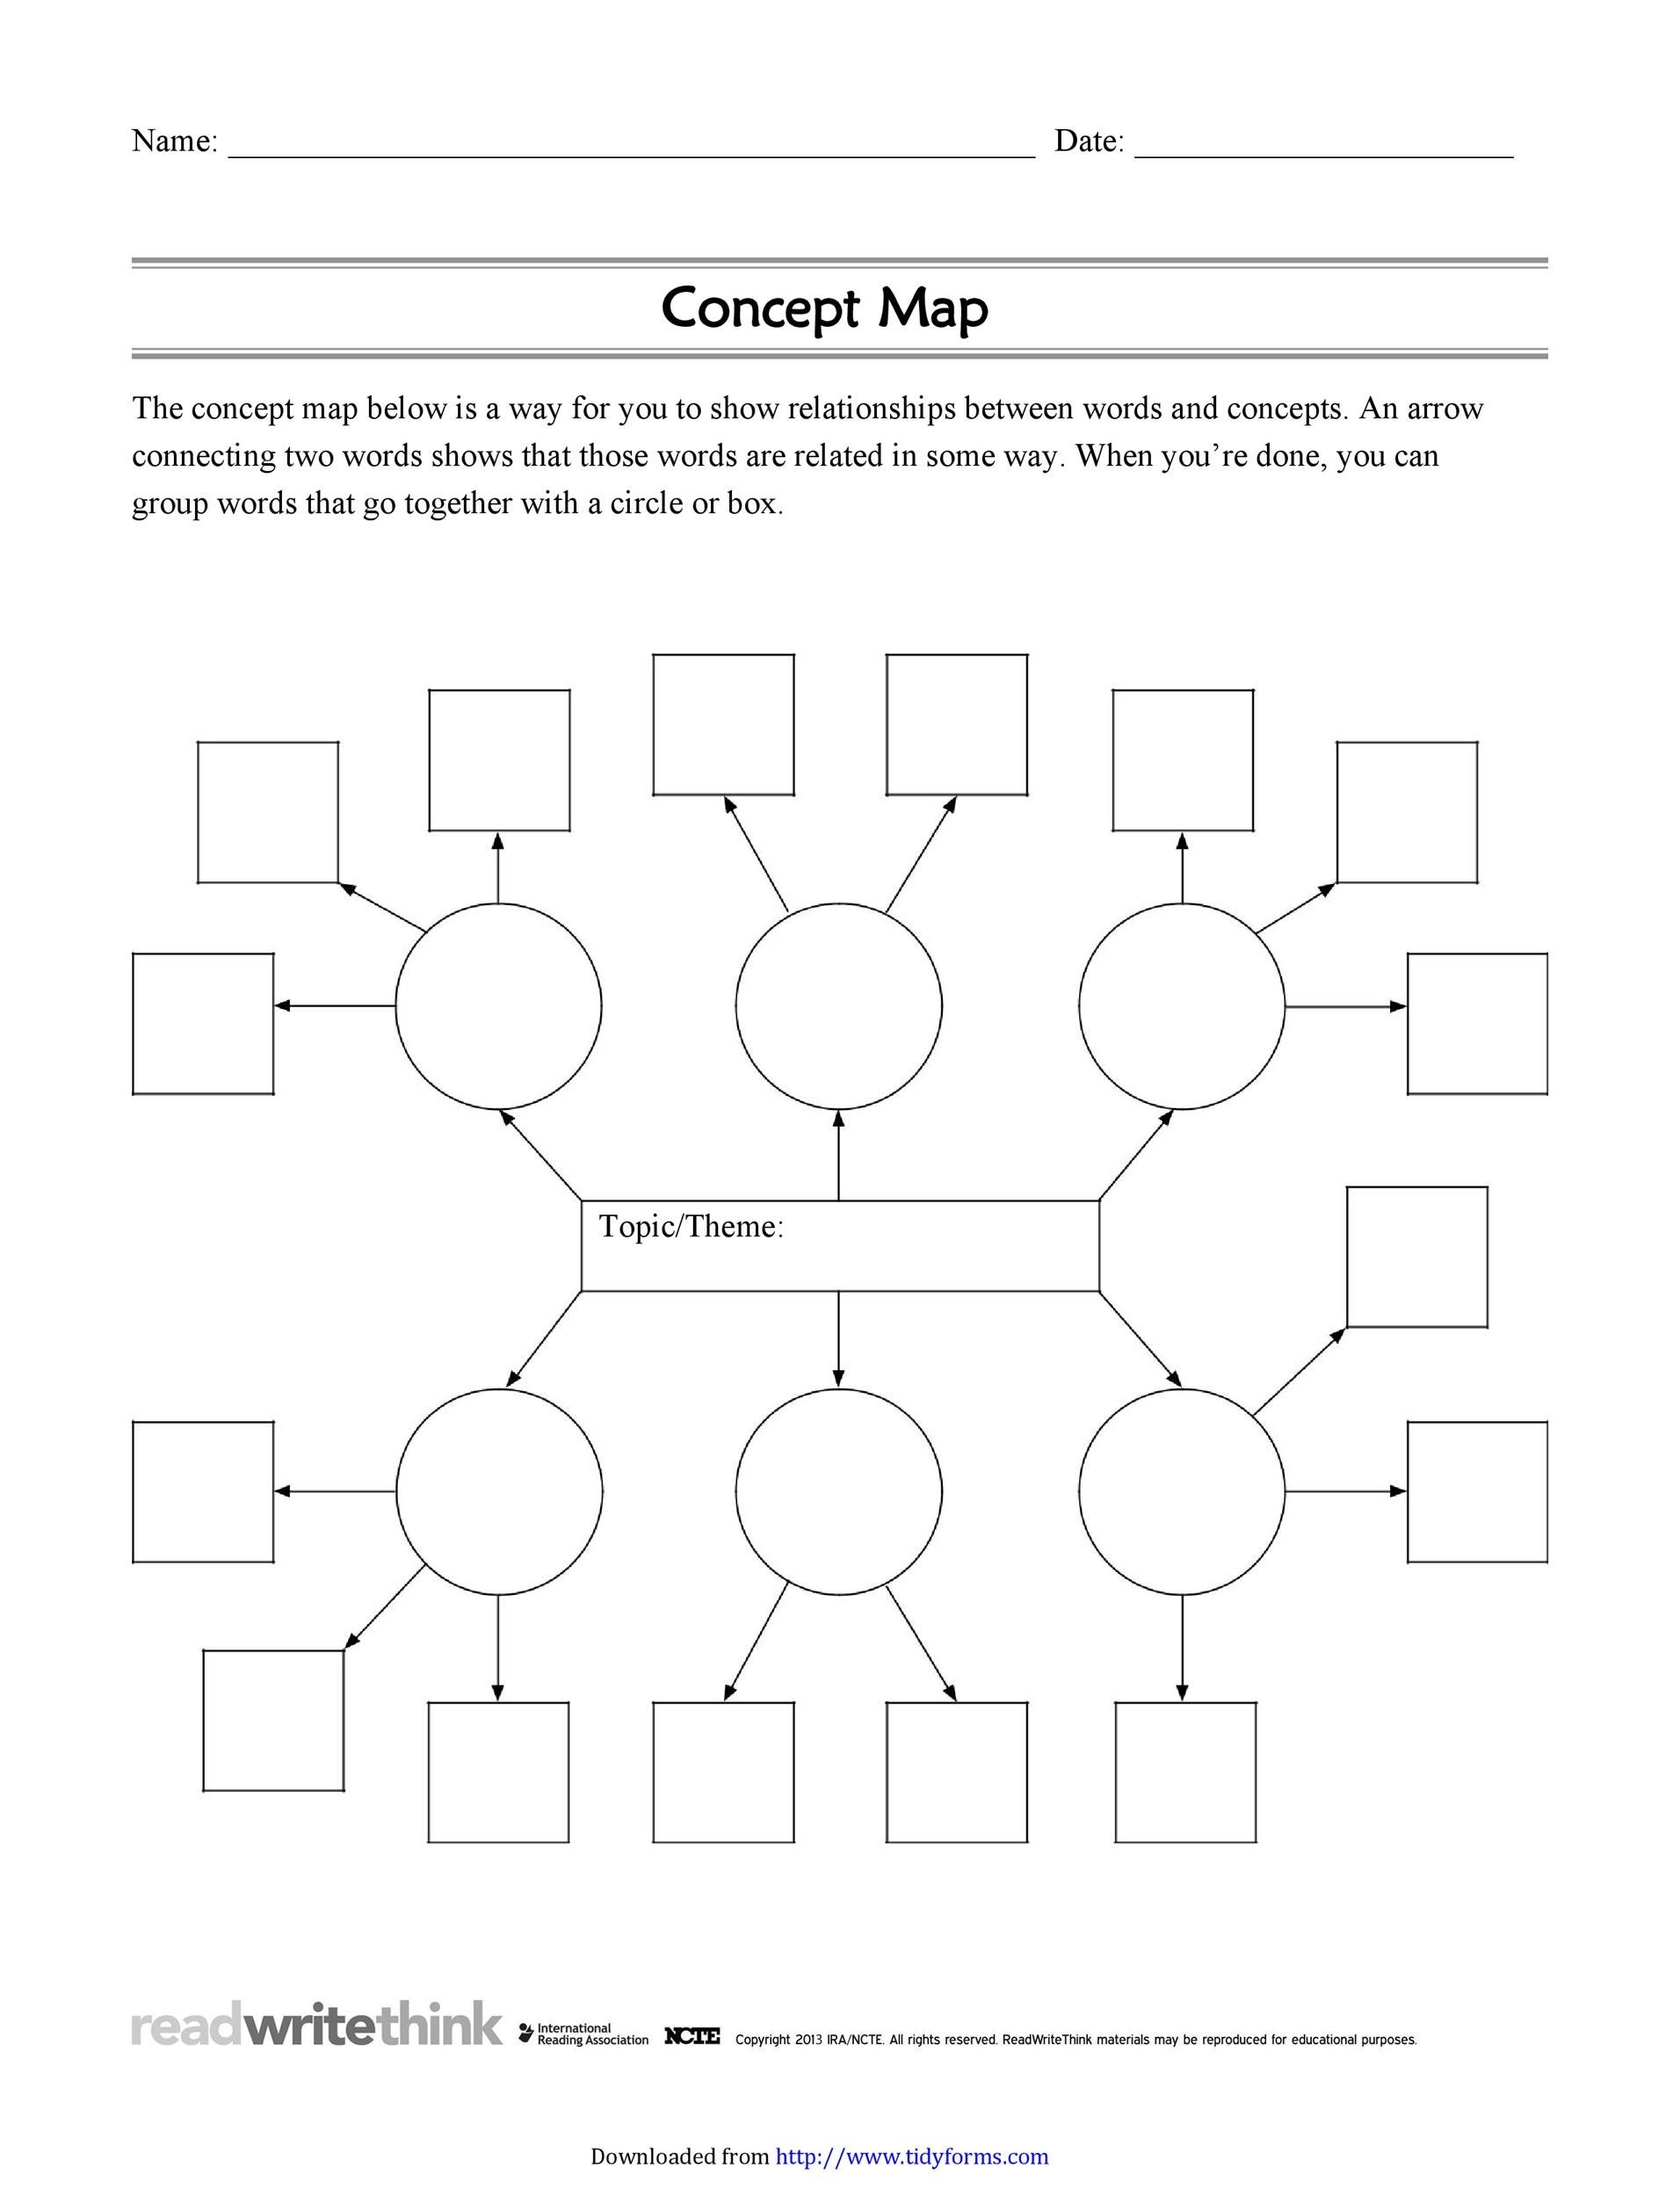 Free concept map template 24